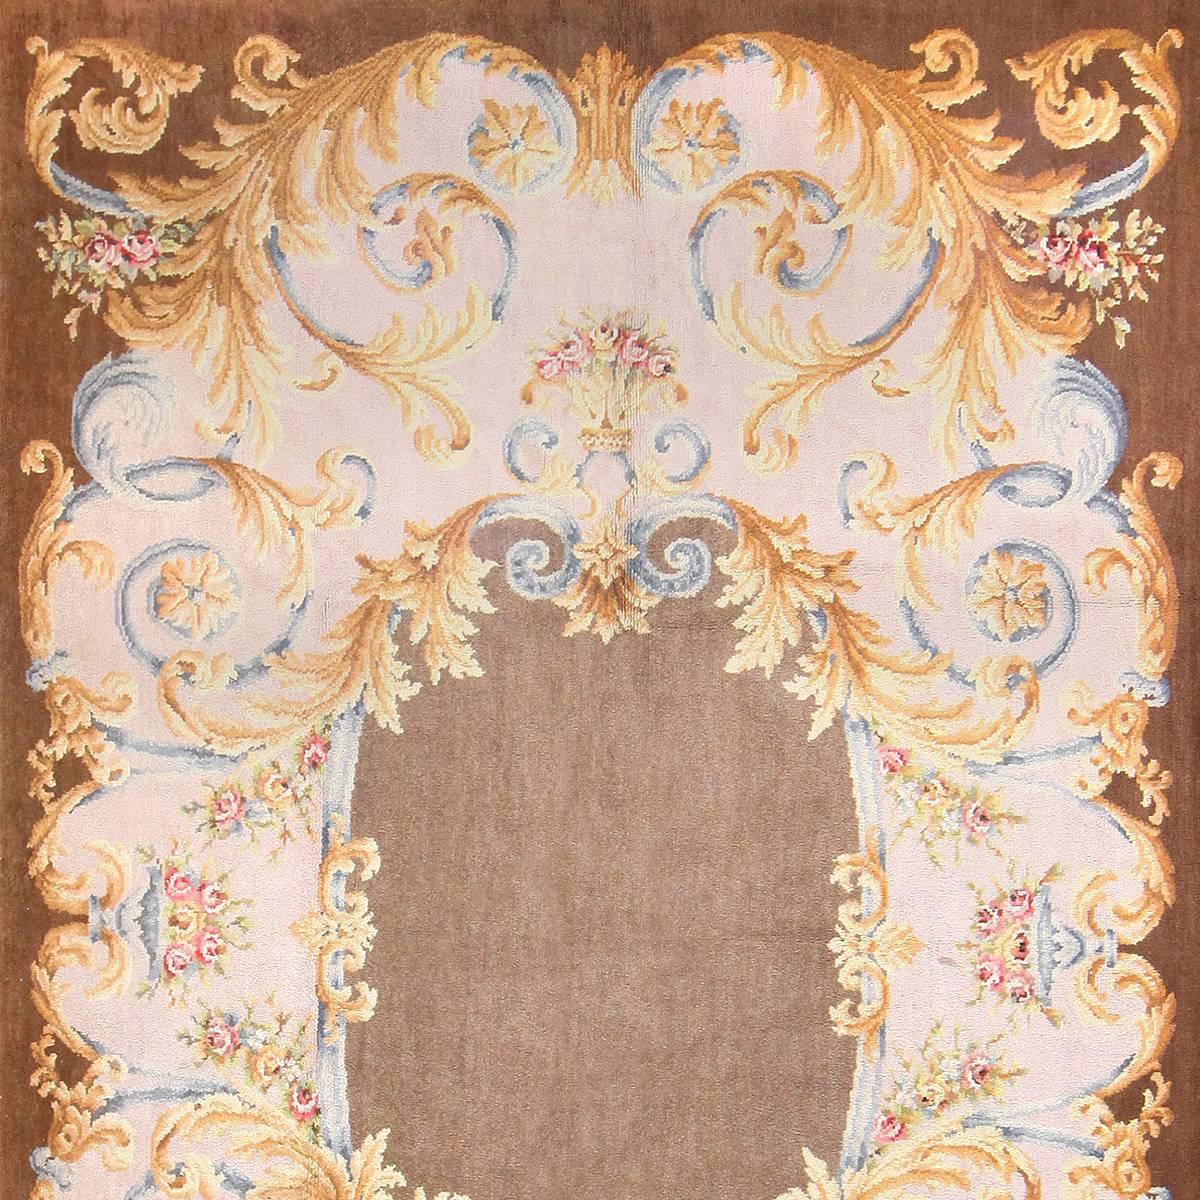 Hand-Knotted Large Antique Savonnerie French Rug. Size: 10 ft 2 in x 17 ft (3.1 m x 5.18 m)